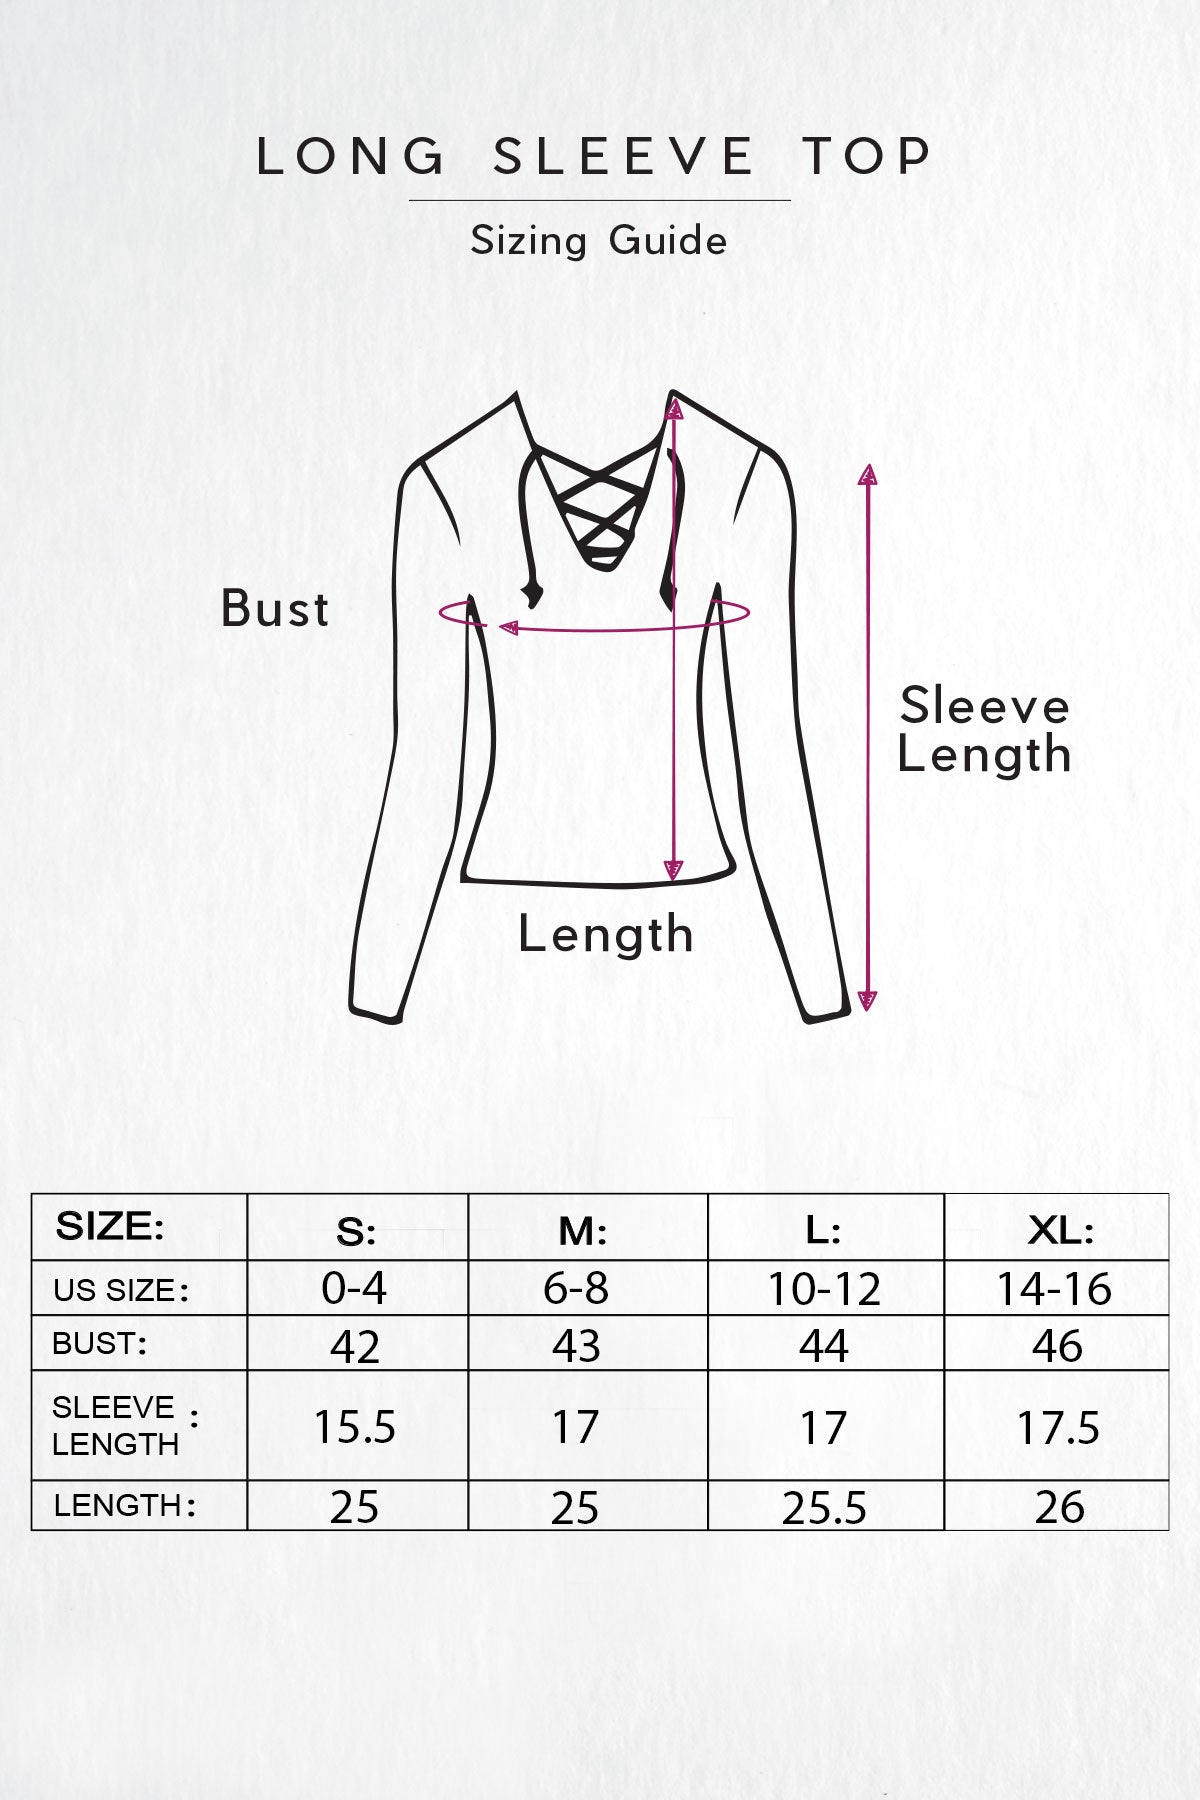 Long Sleeve Top Sizing Guide